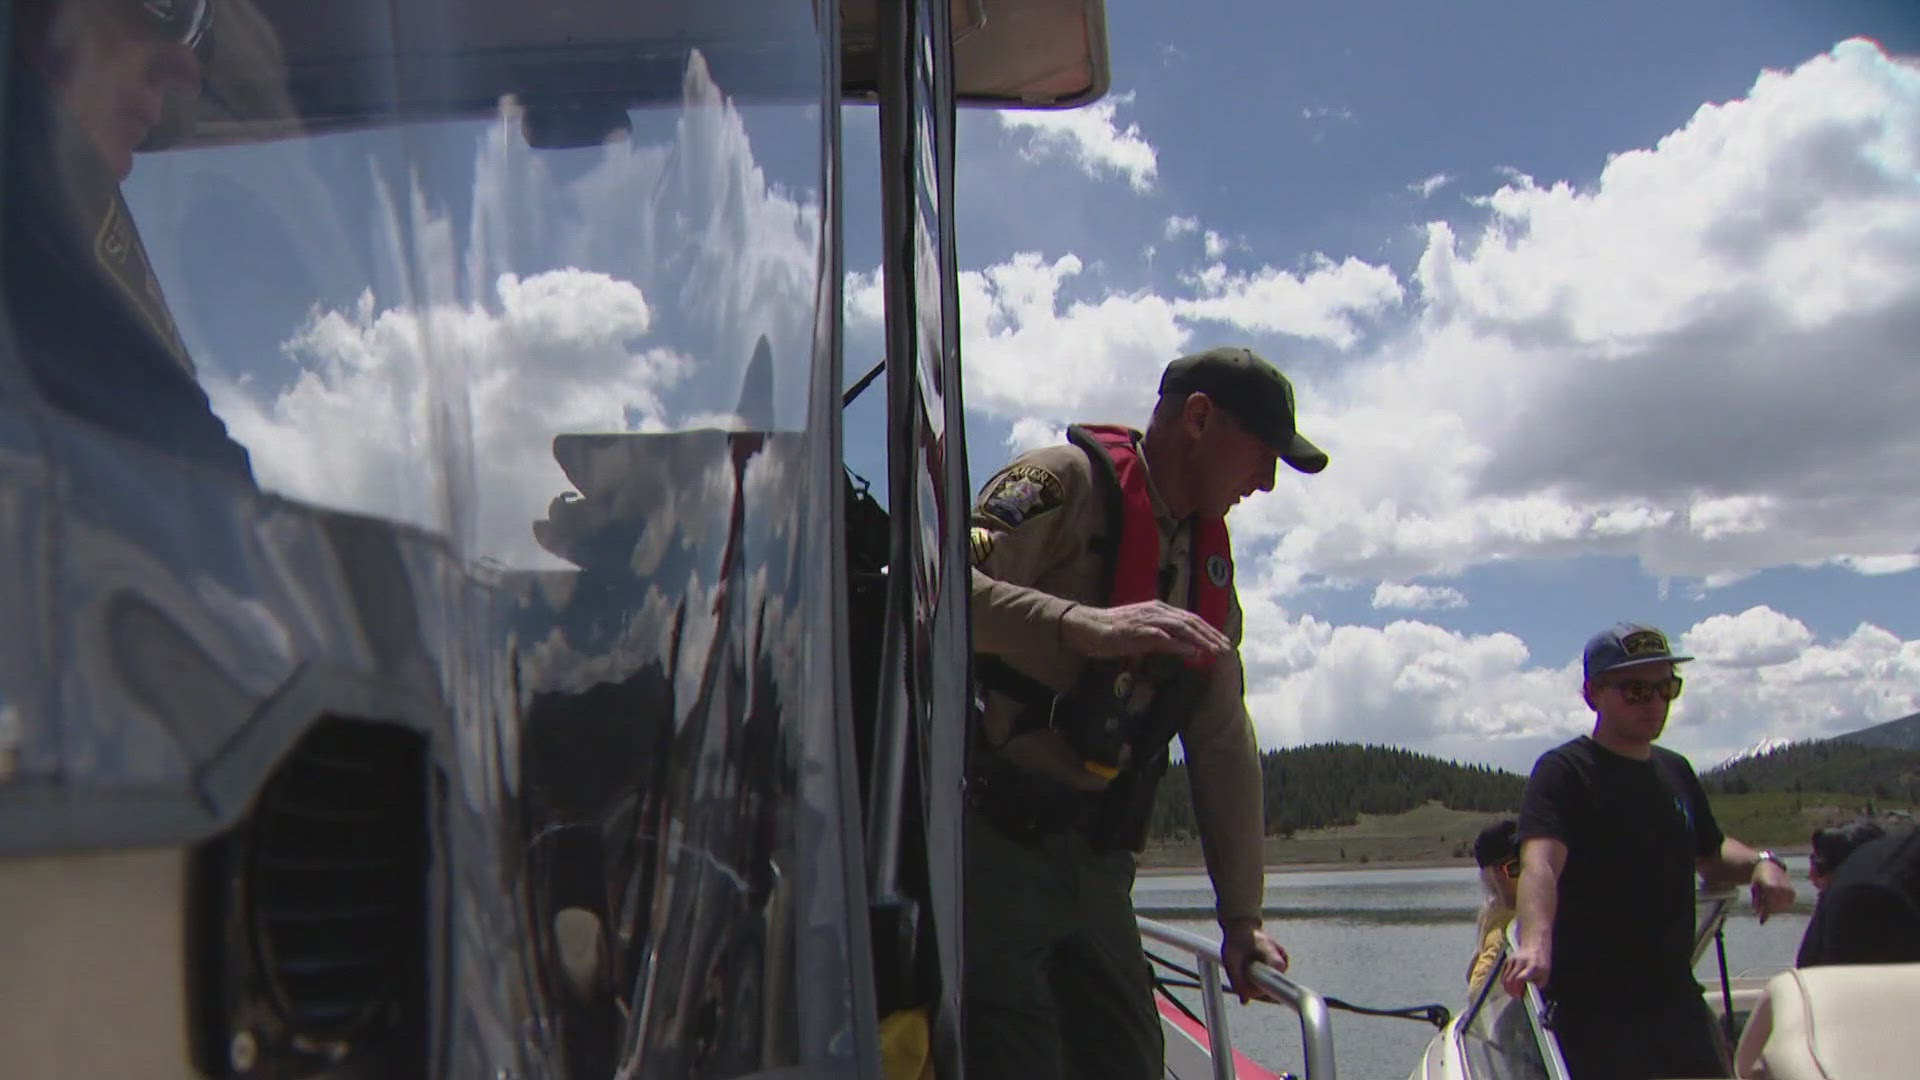 A windstorm hit Dillon Reservoir on Saturday causing multiple people to fall into the water.